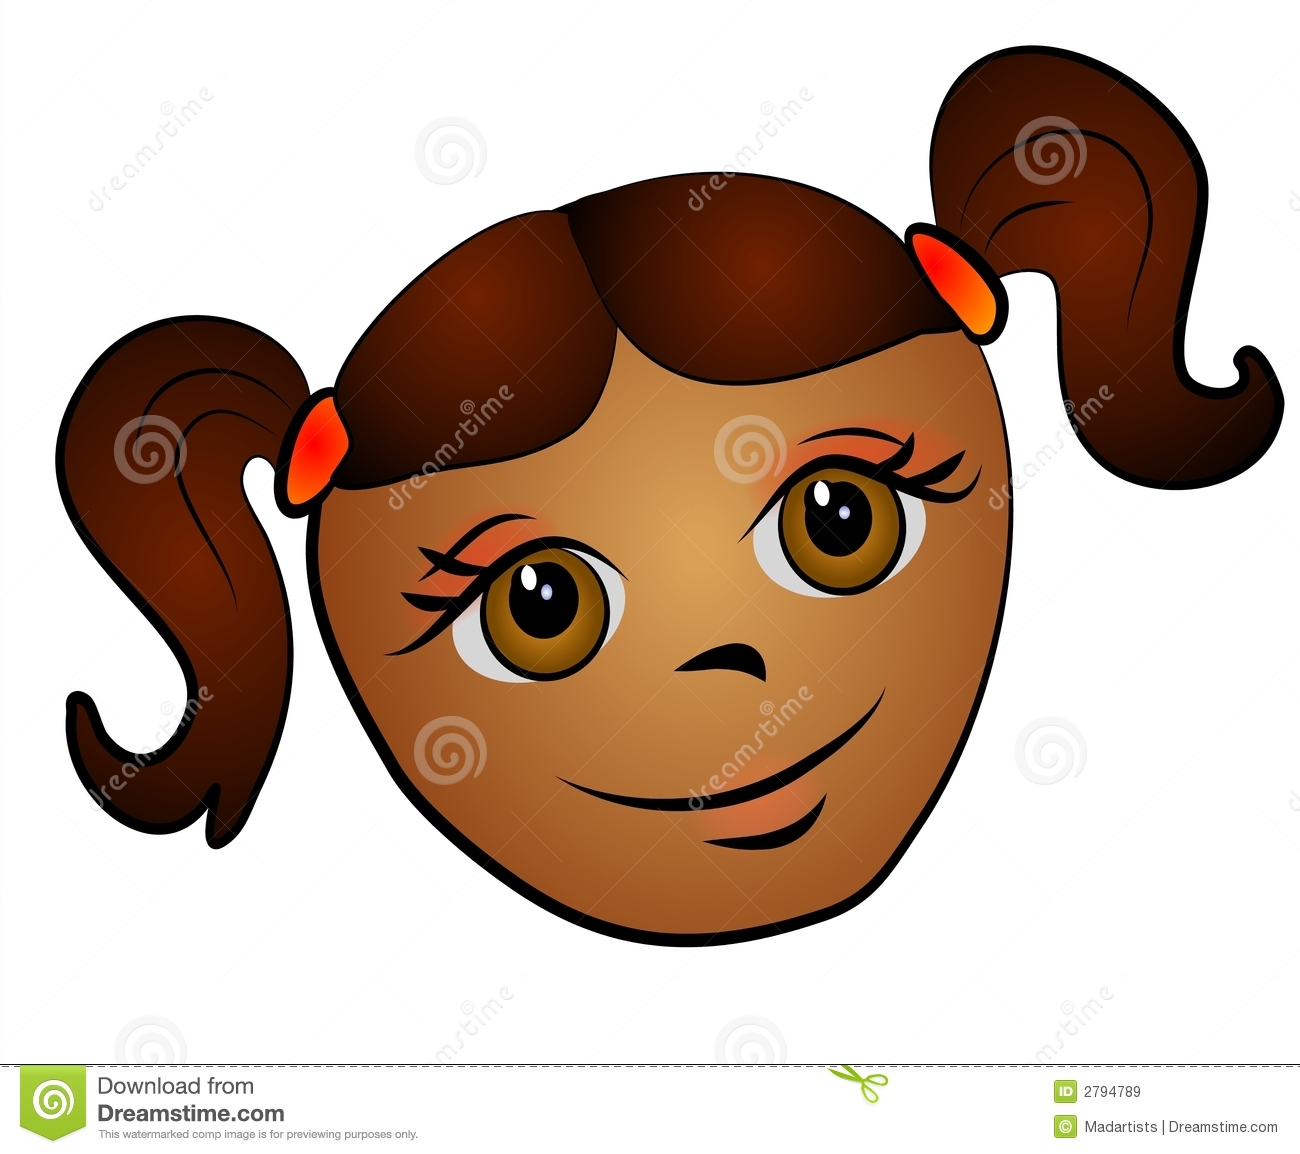 Cartoon Caricature Illustration Of A Little Girl S Head   A Toddler